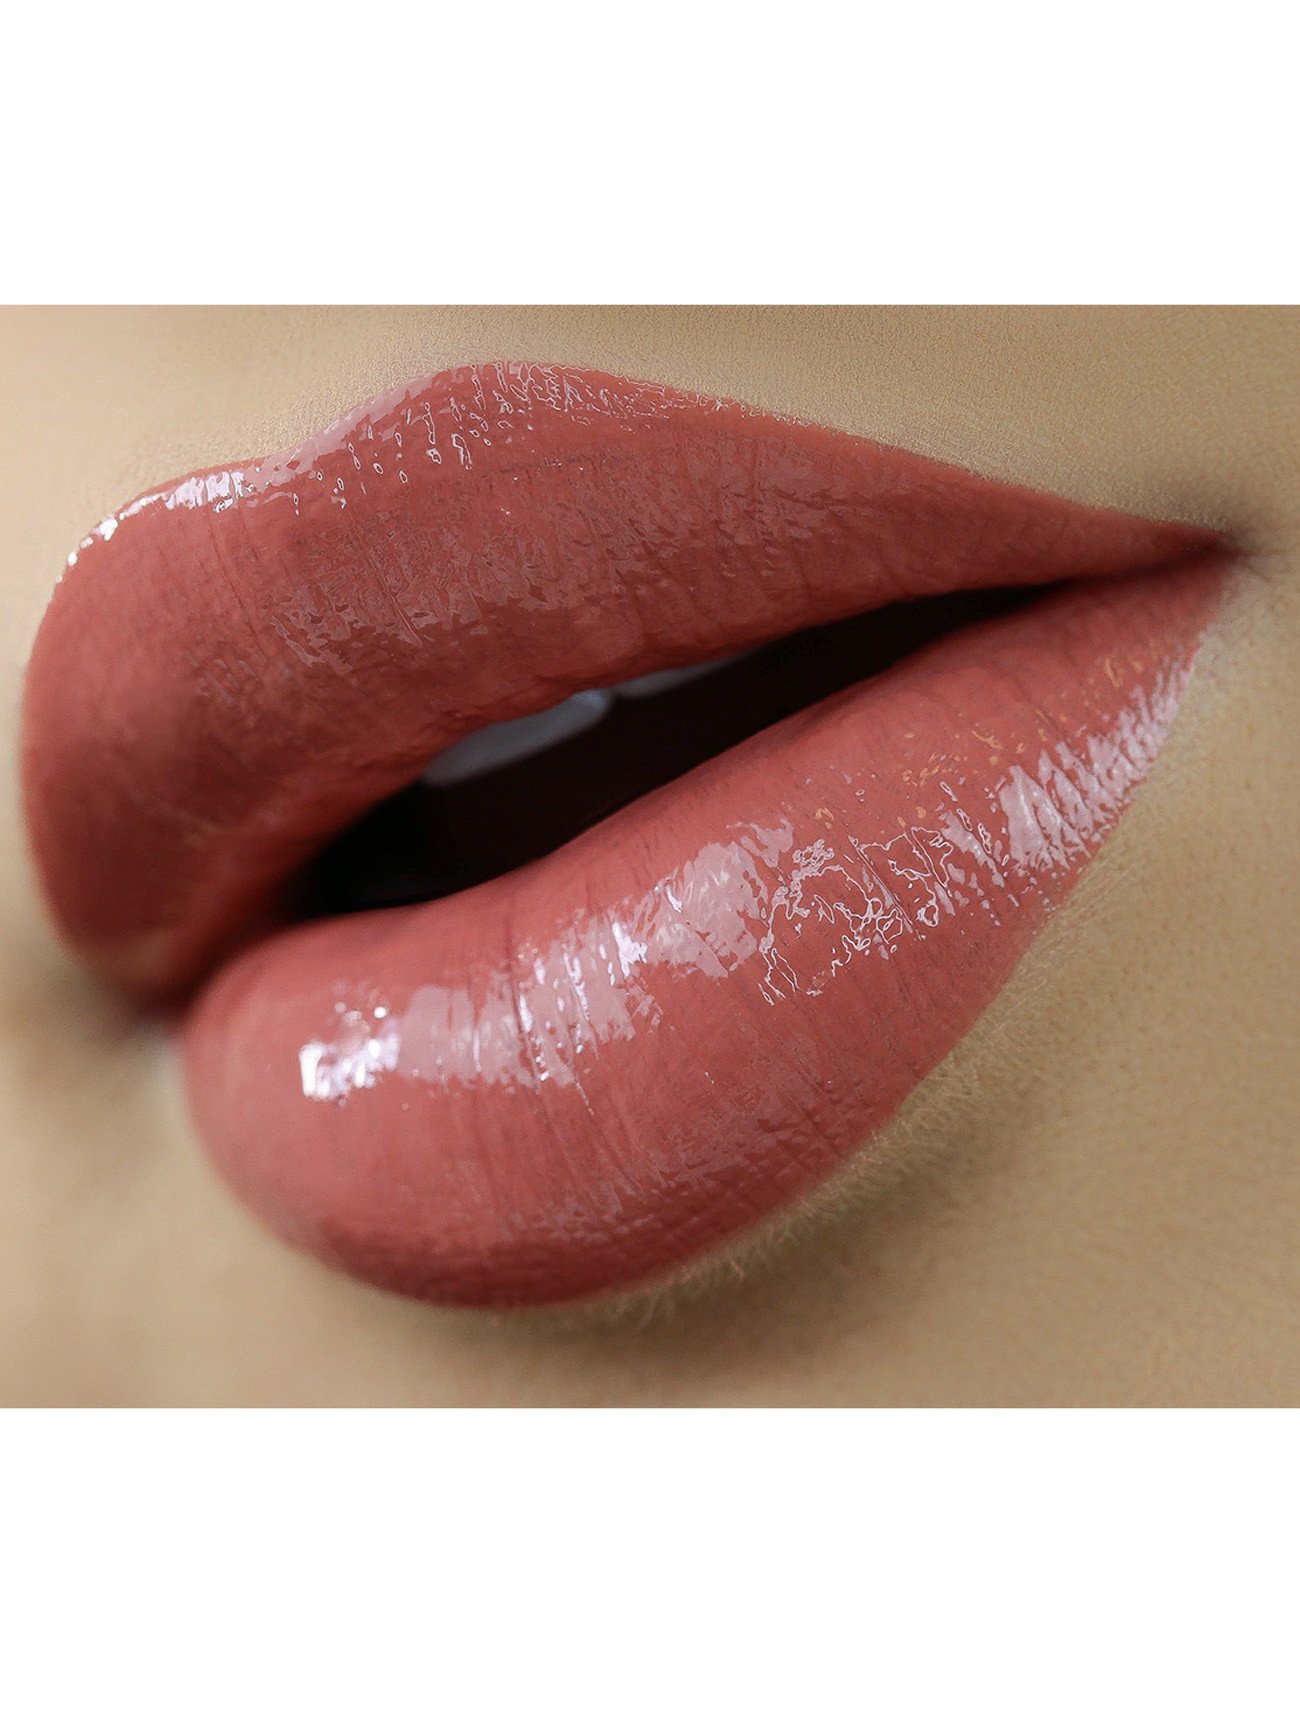 Candy K | Gloss | Kylie Cosmetics℠ by Kylie Jenner